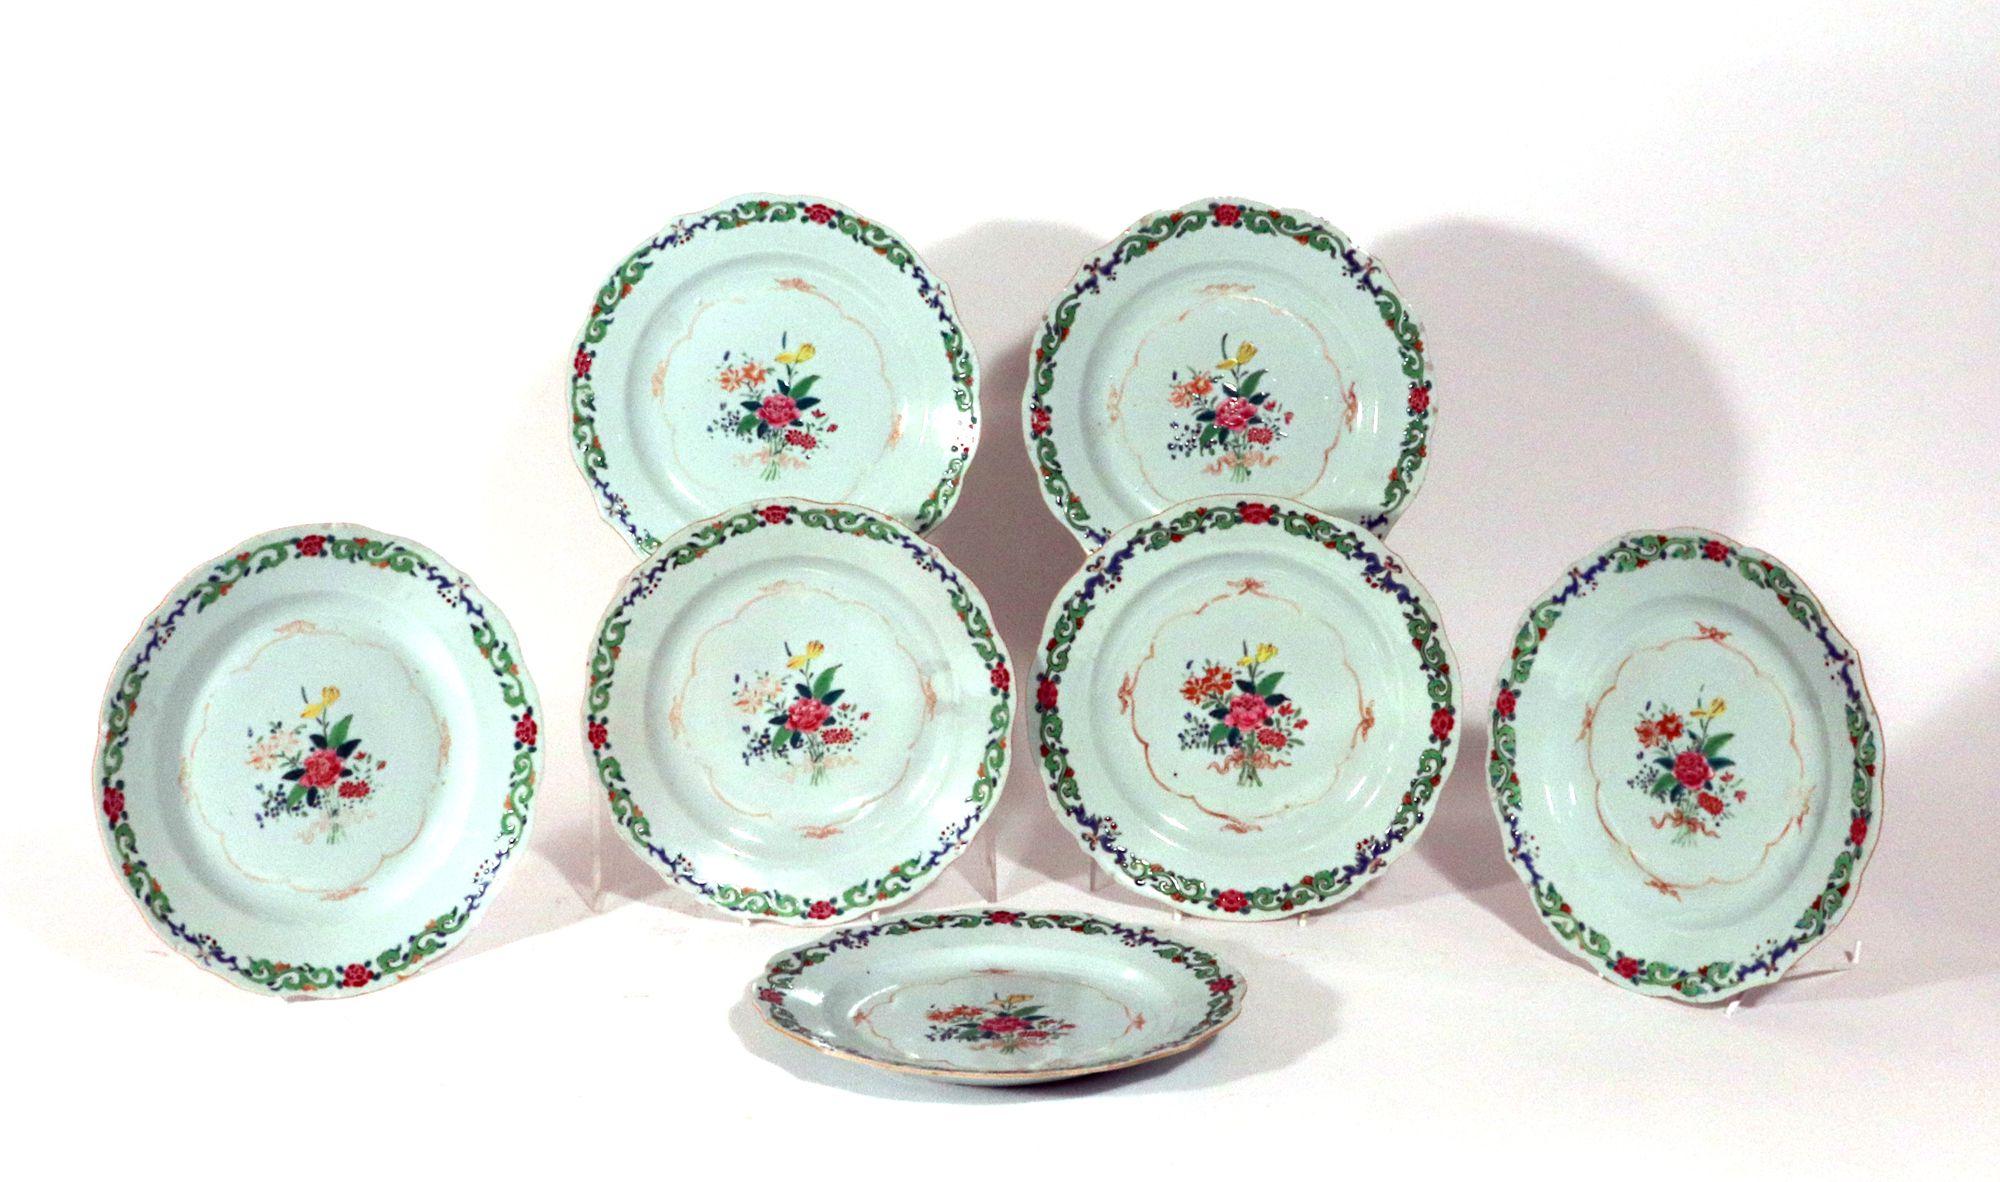 Chinese Export Famille Rose Porcelain Plates with Green Enamel, 
Set of Twelve,
Circa 1775

The Chinese Export porcelain plates had a wavy shaped rim which is decorated with a continuous leaf and flower scroll band in green enamel and famille rose. 